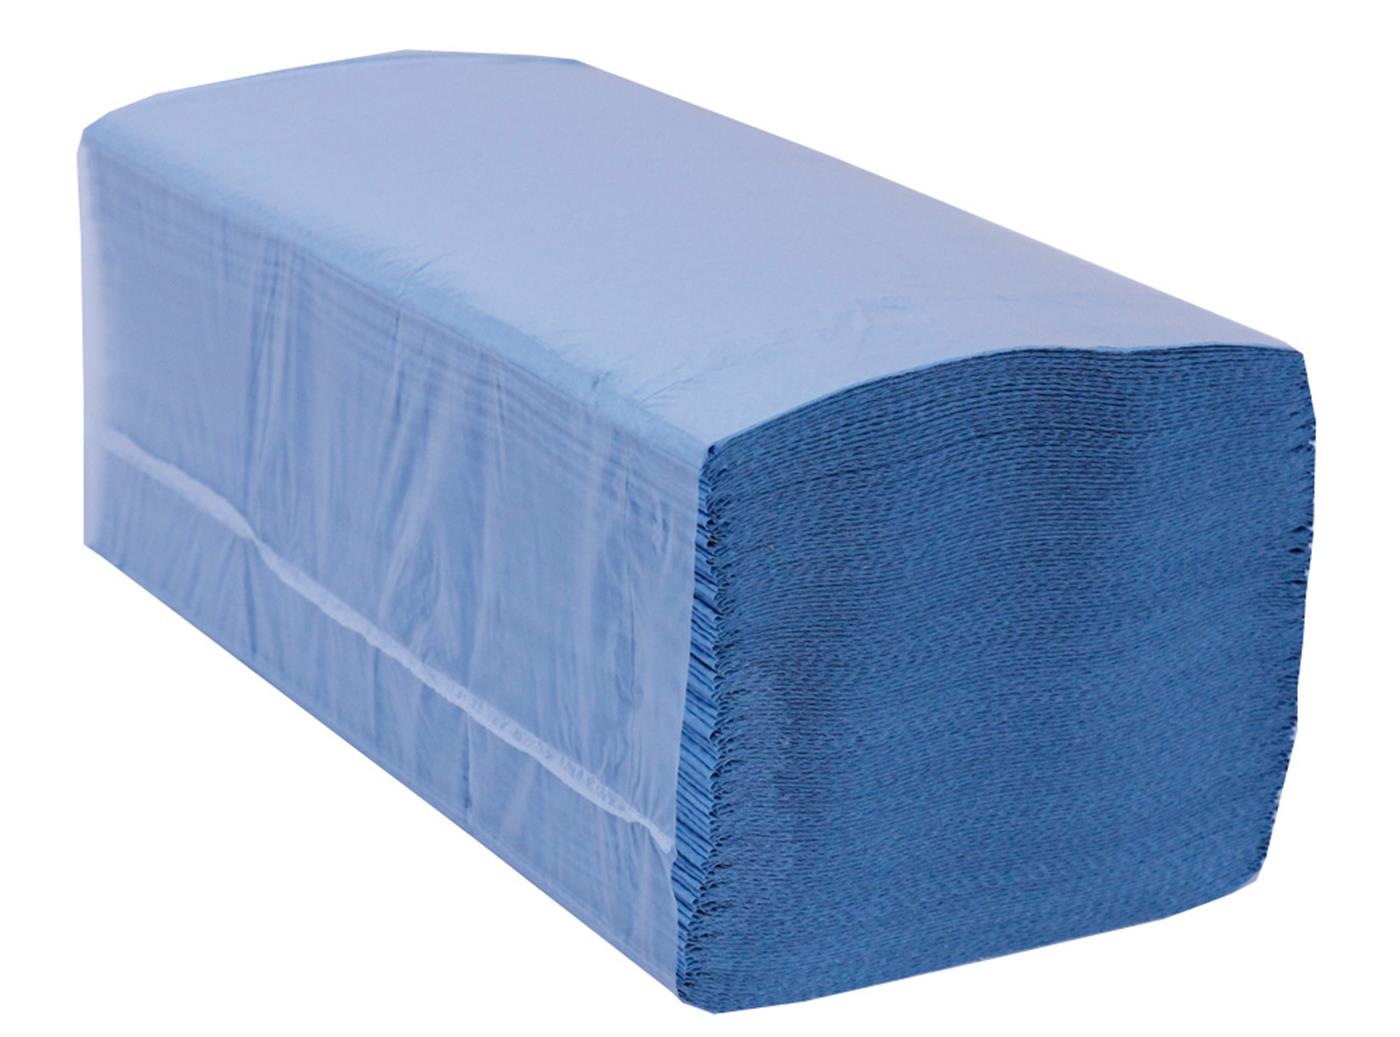 PRO Easipull Interfold 1 Ply Recycled Paper Hand Towel Blue